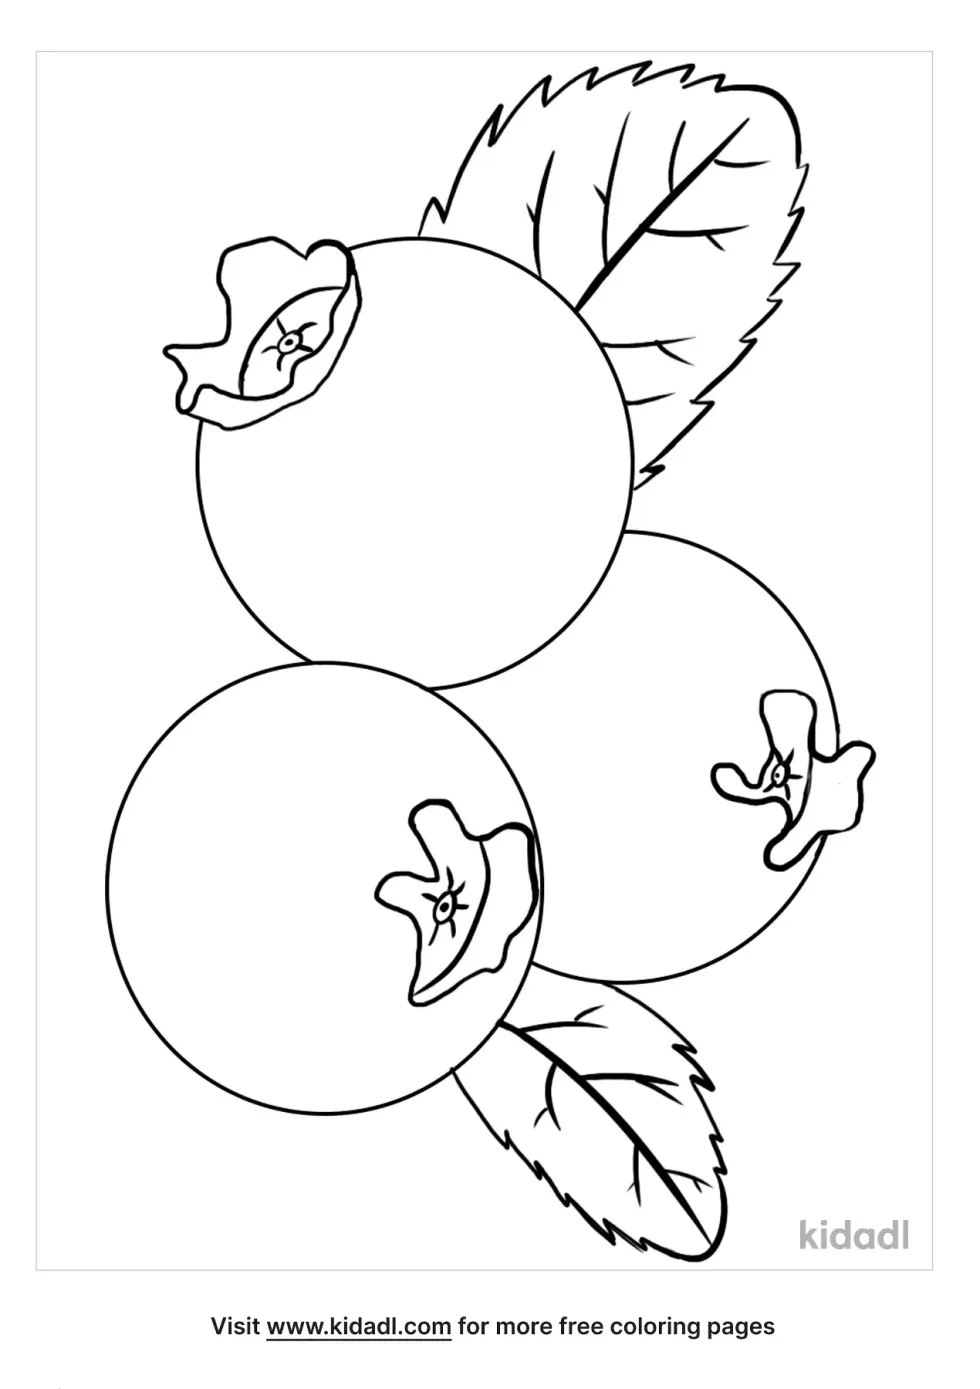 Blueberries Coloring Page